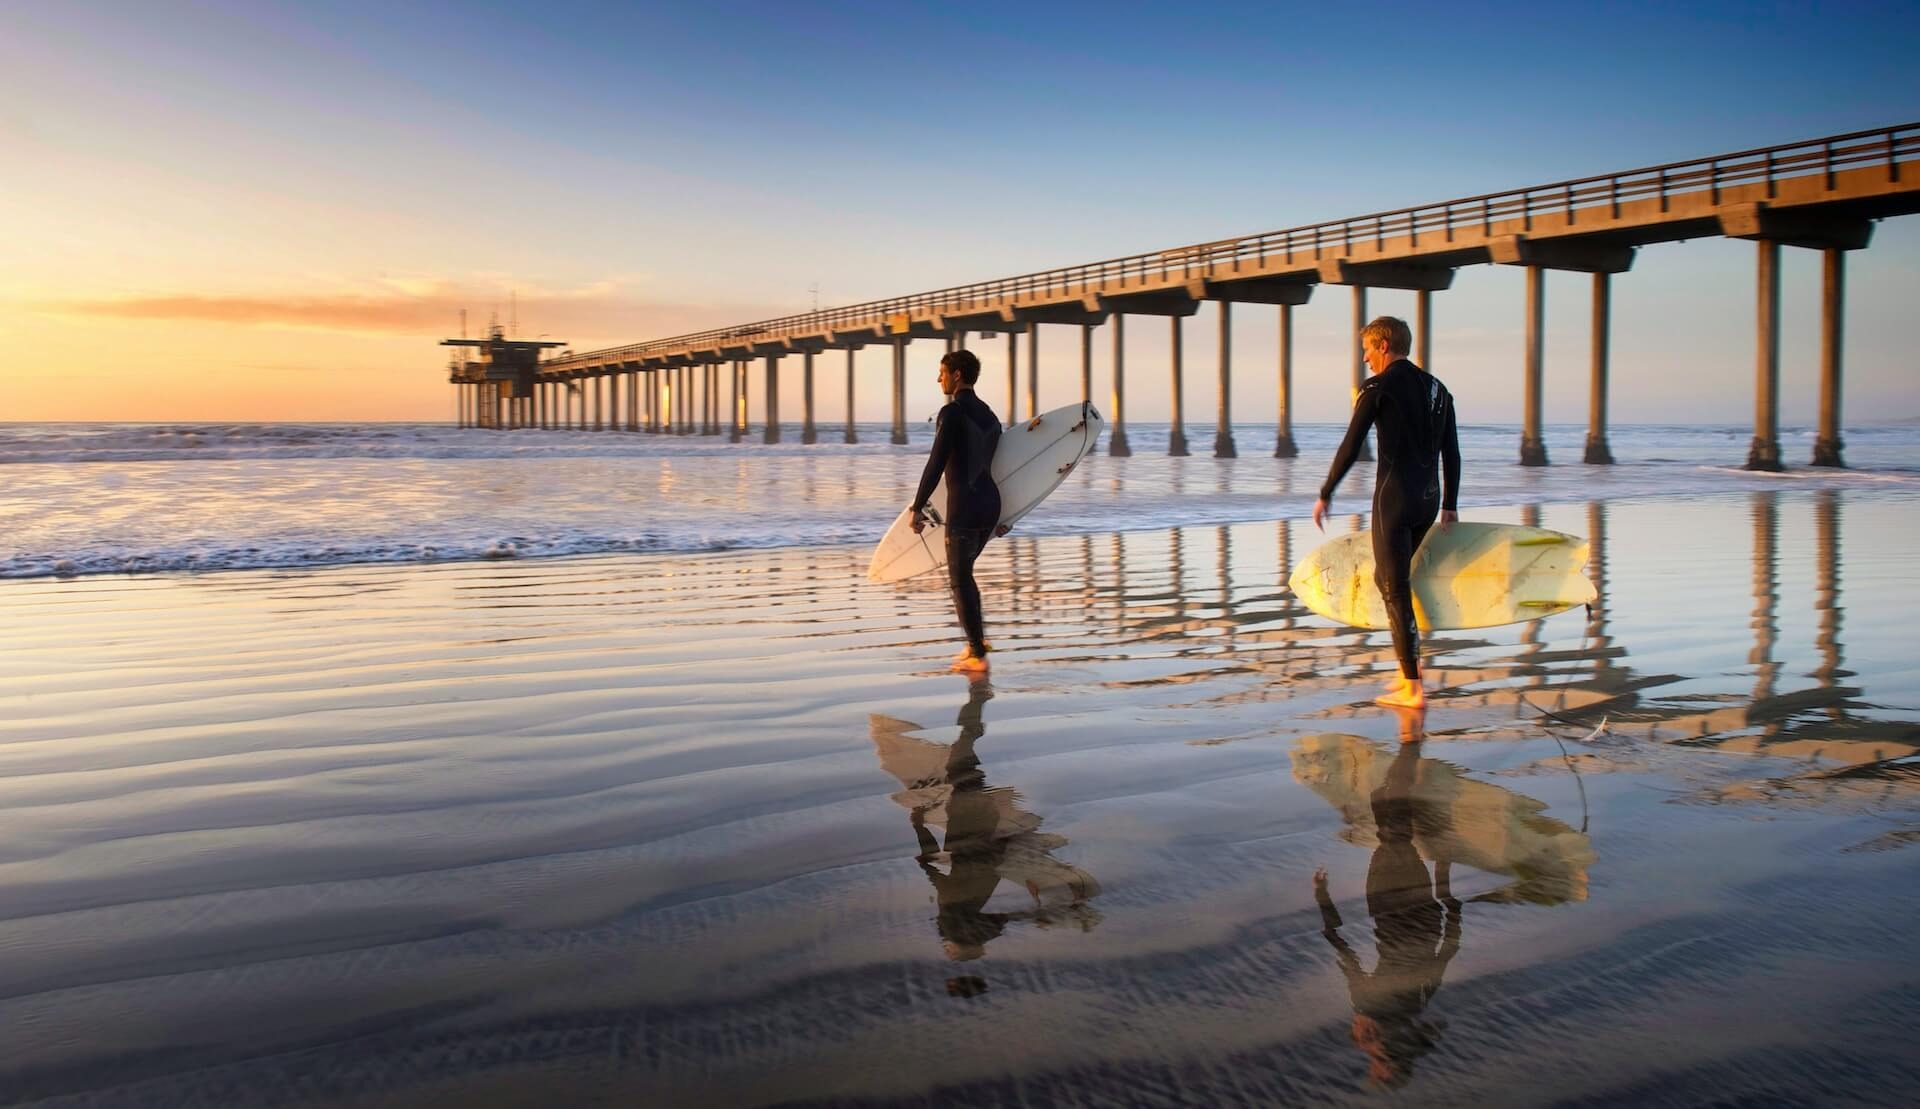 Two surfers in black bodysuits walk across the sand carrying their boards toward the waves for a sunset surf near a pier in San Diego